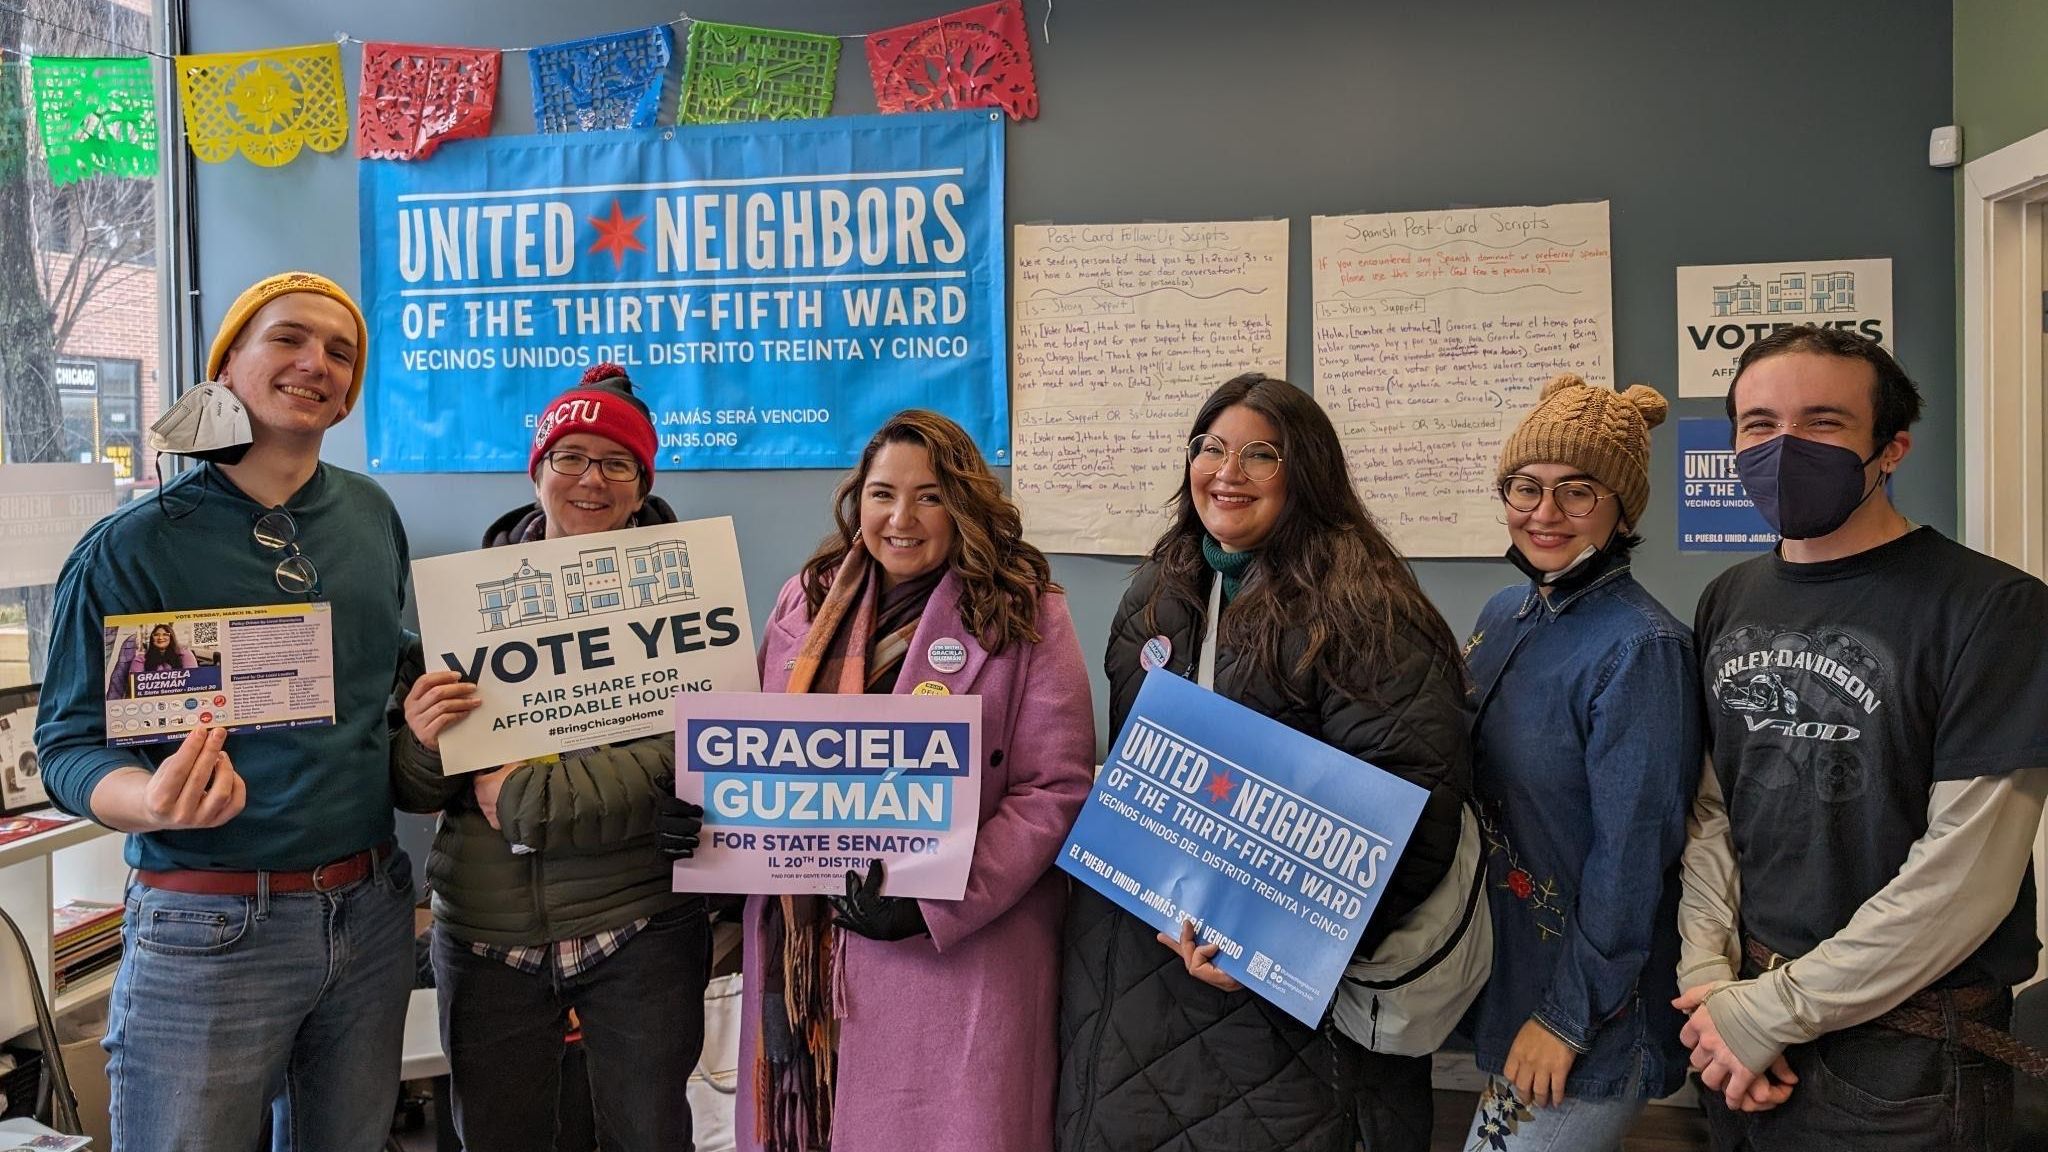 Bring Chicago Home and Graciela Guzmán Canvassing